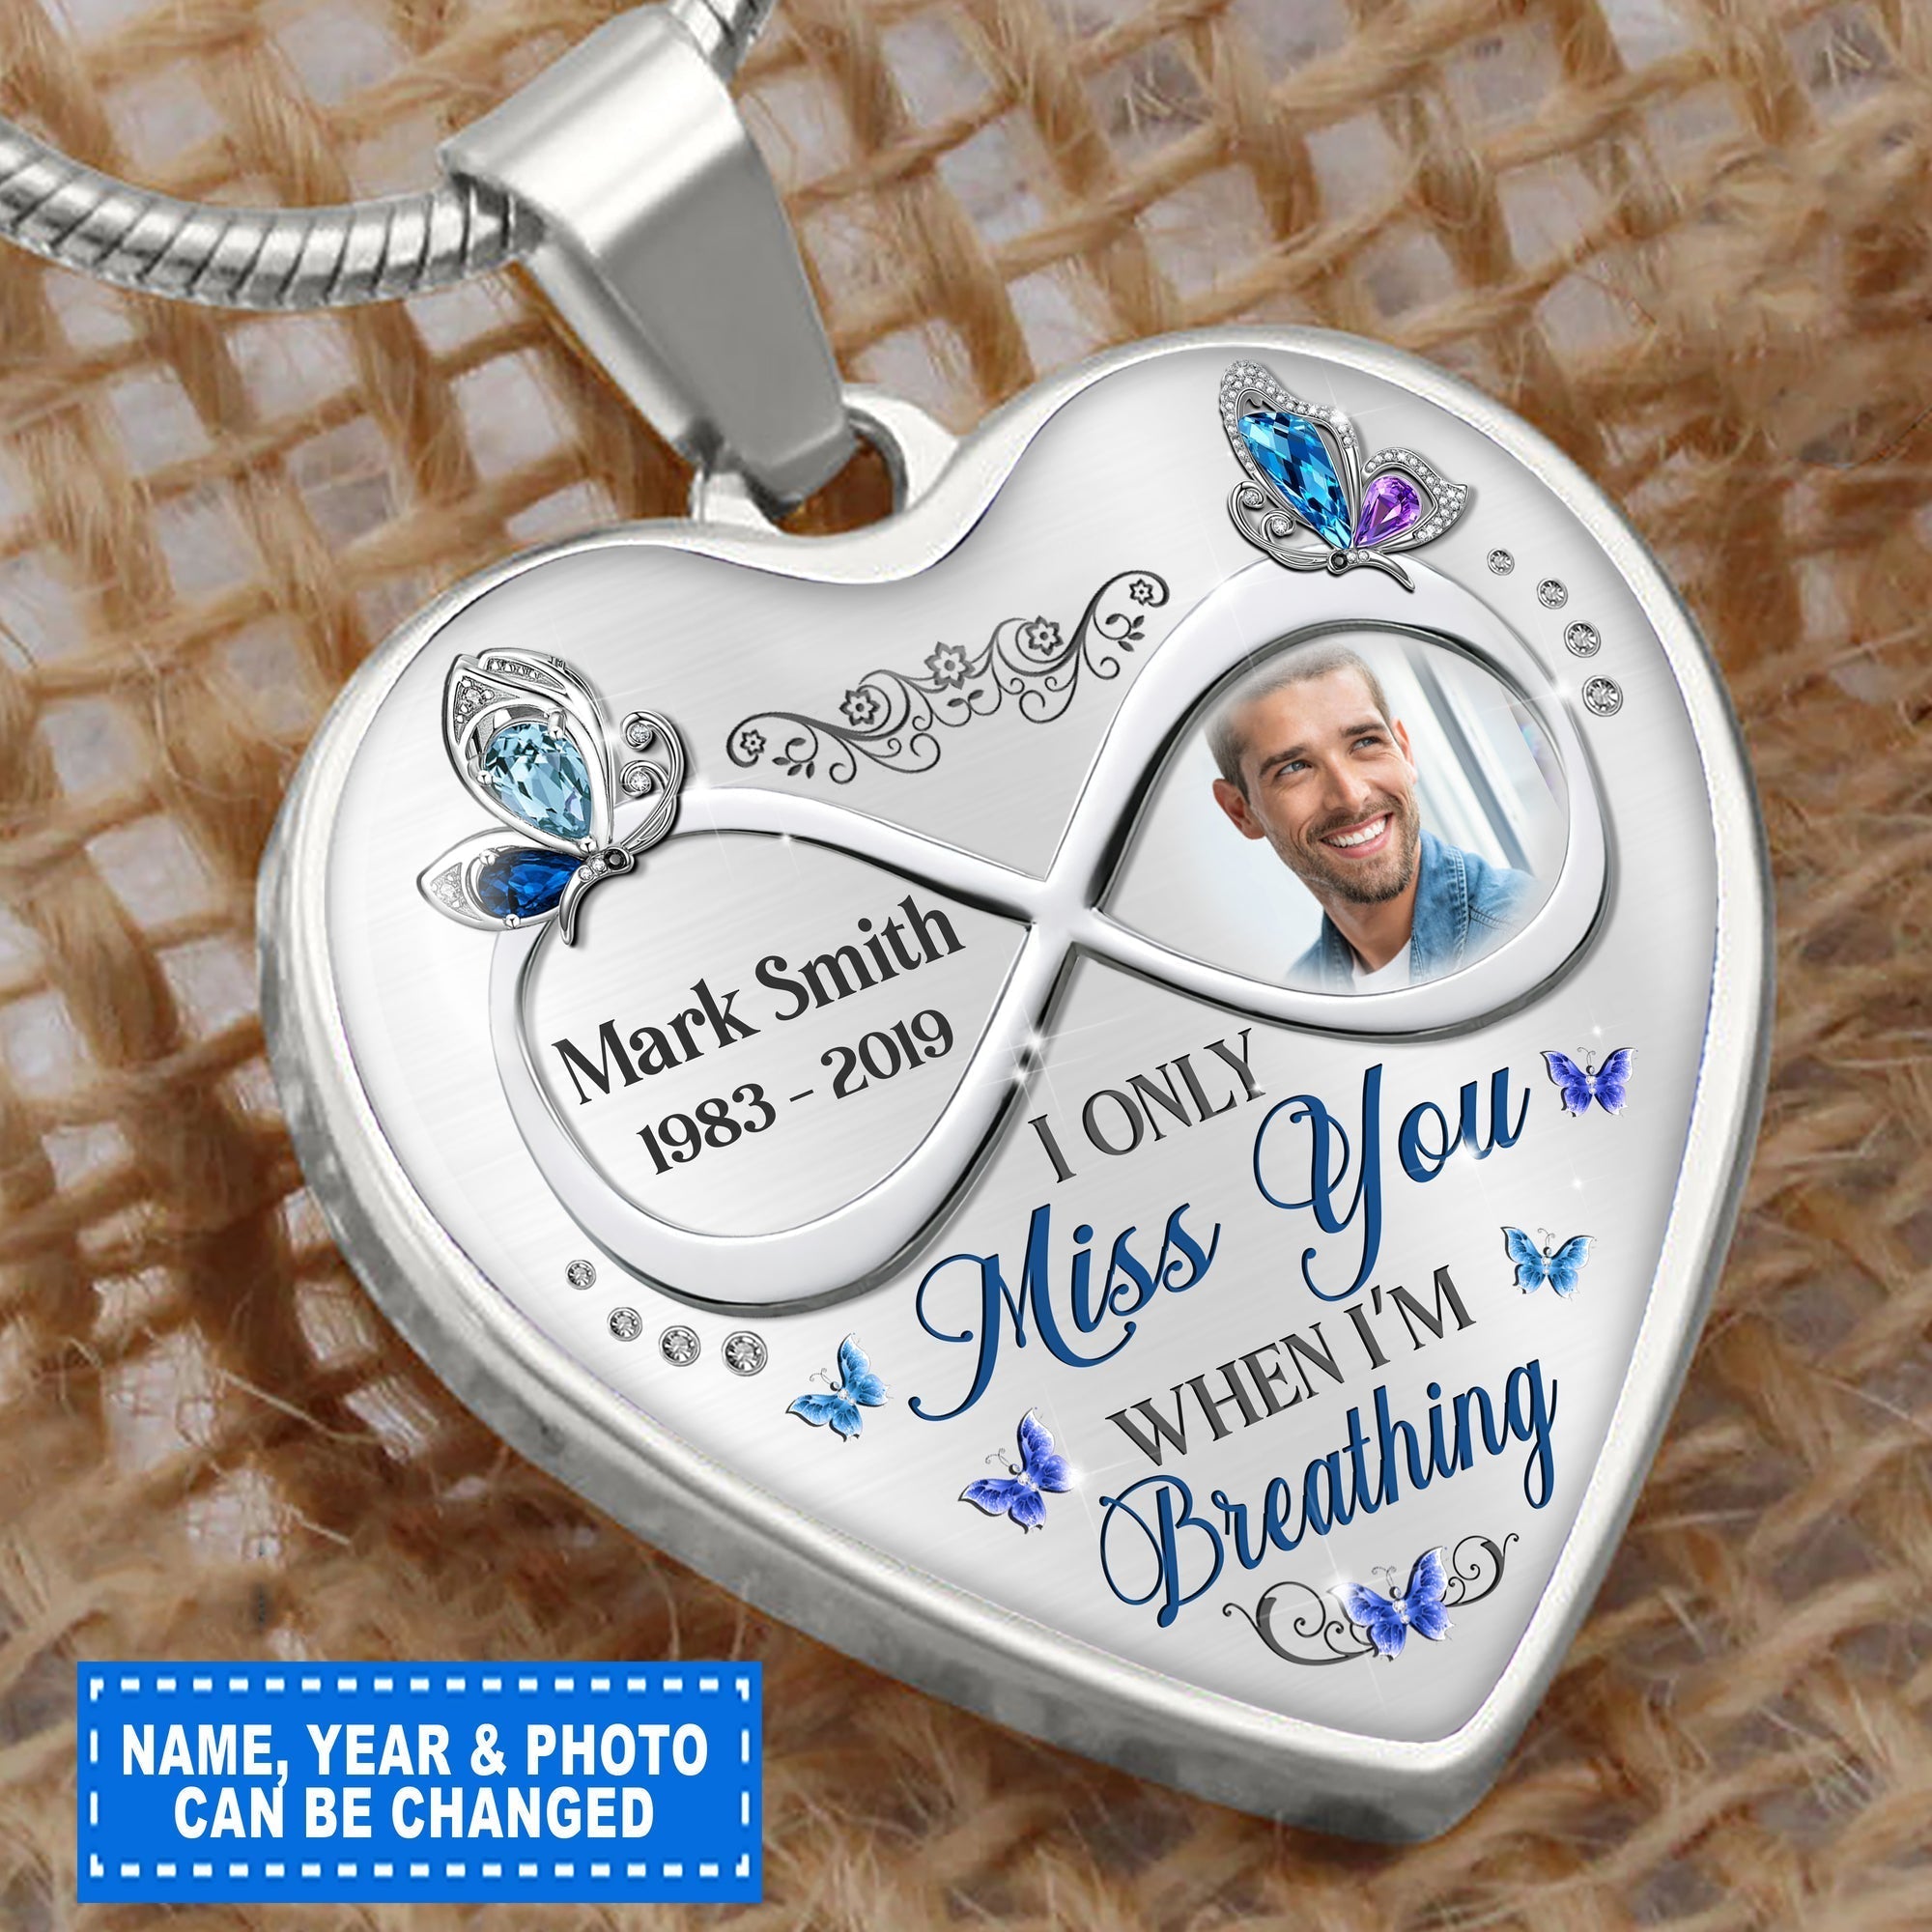 I Only Miss You When I'm Breathing Personalized Necklace